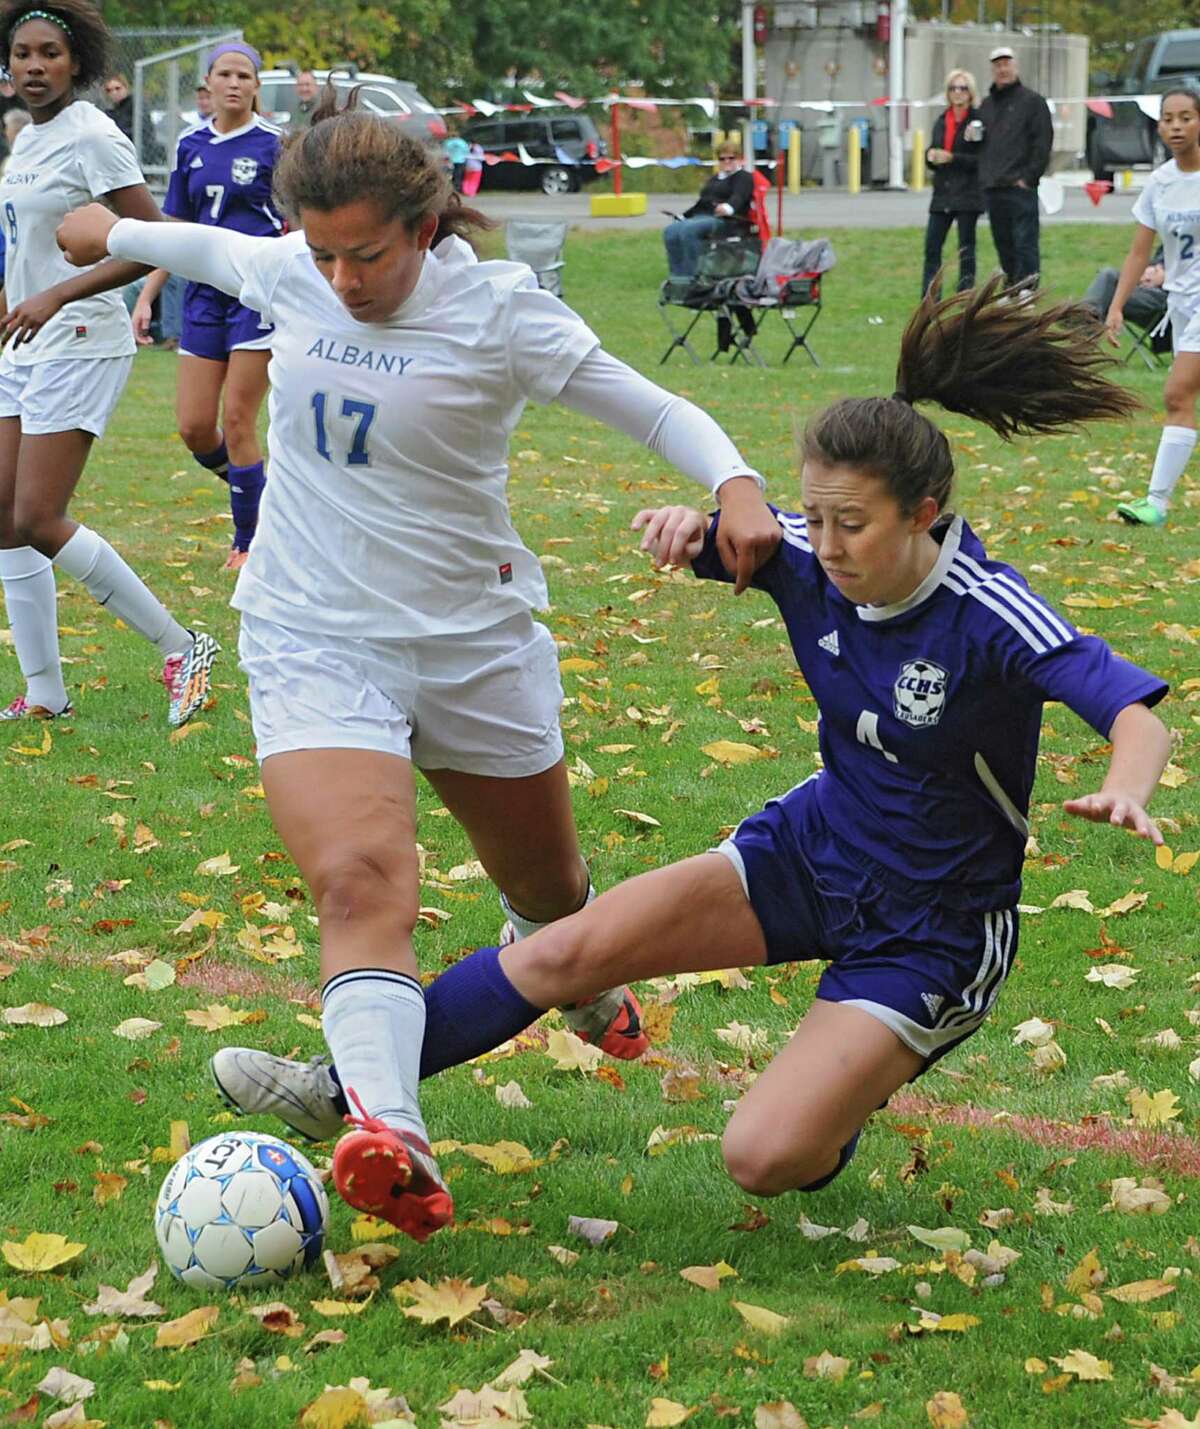 Albany's Isabella Higgins, left, battles for the ball against Catholic Central's Sydney Moss during the girl's championship game on Monday, Oct. 13, 2014 in Castleton-on-Hudson, N.Y. (Lori Van Buren / Times Union)